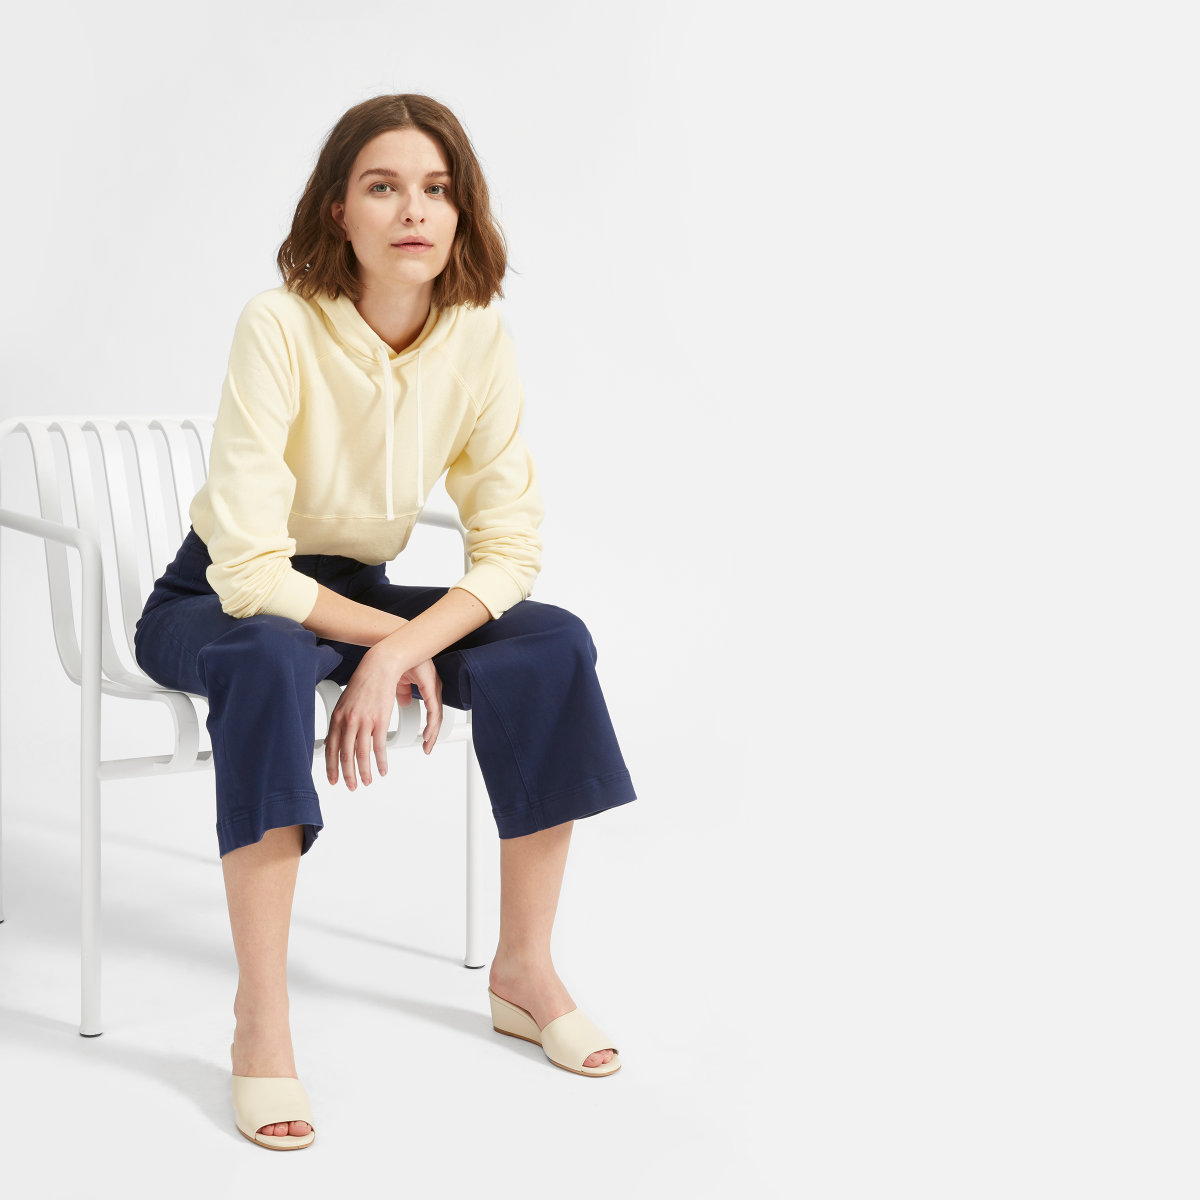 5 Good Things To Buy on Everlane — DNAMAG